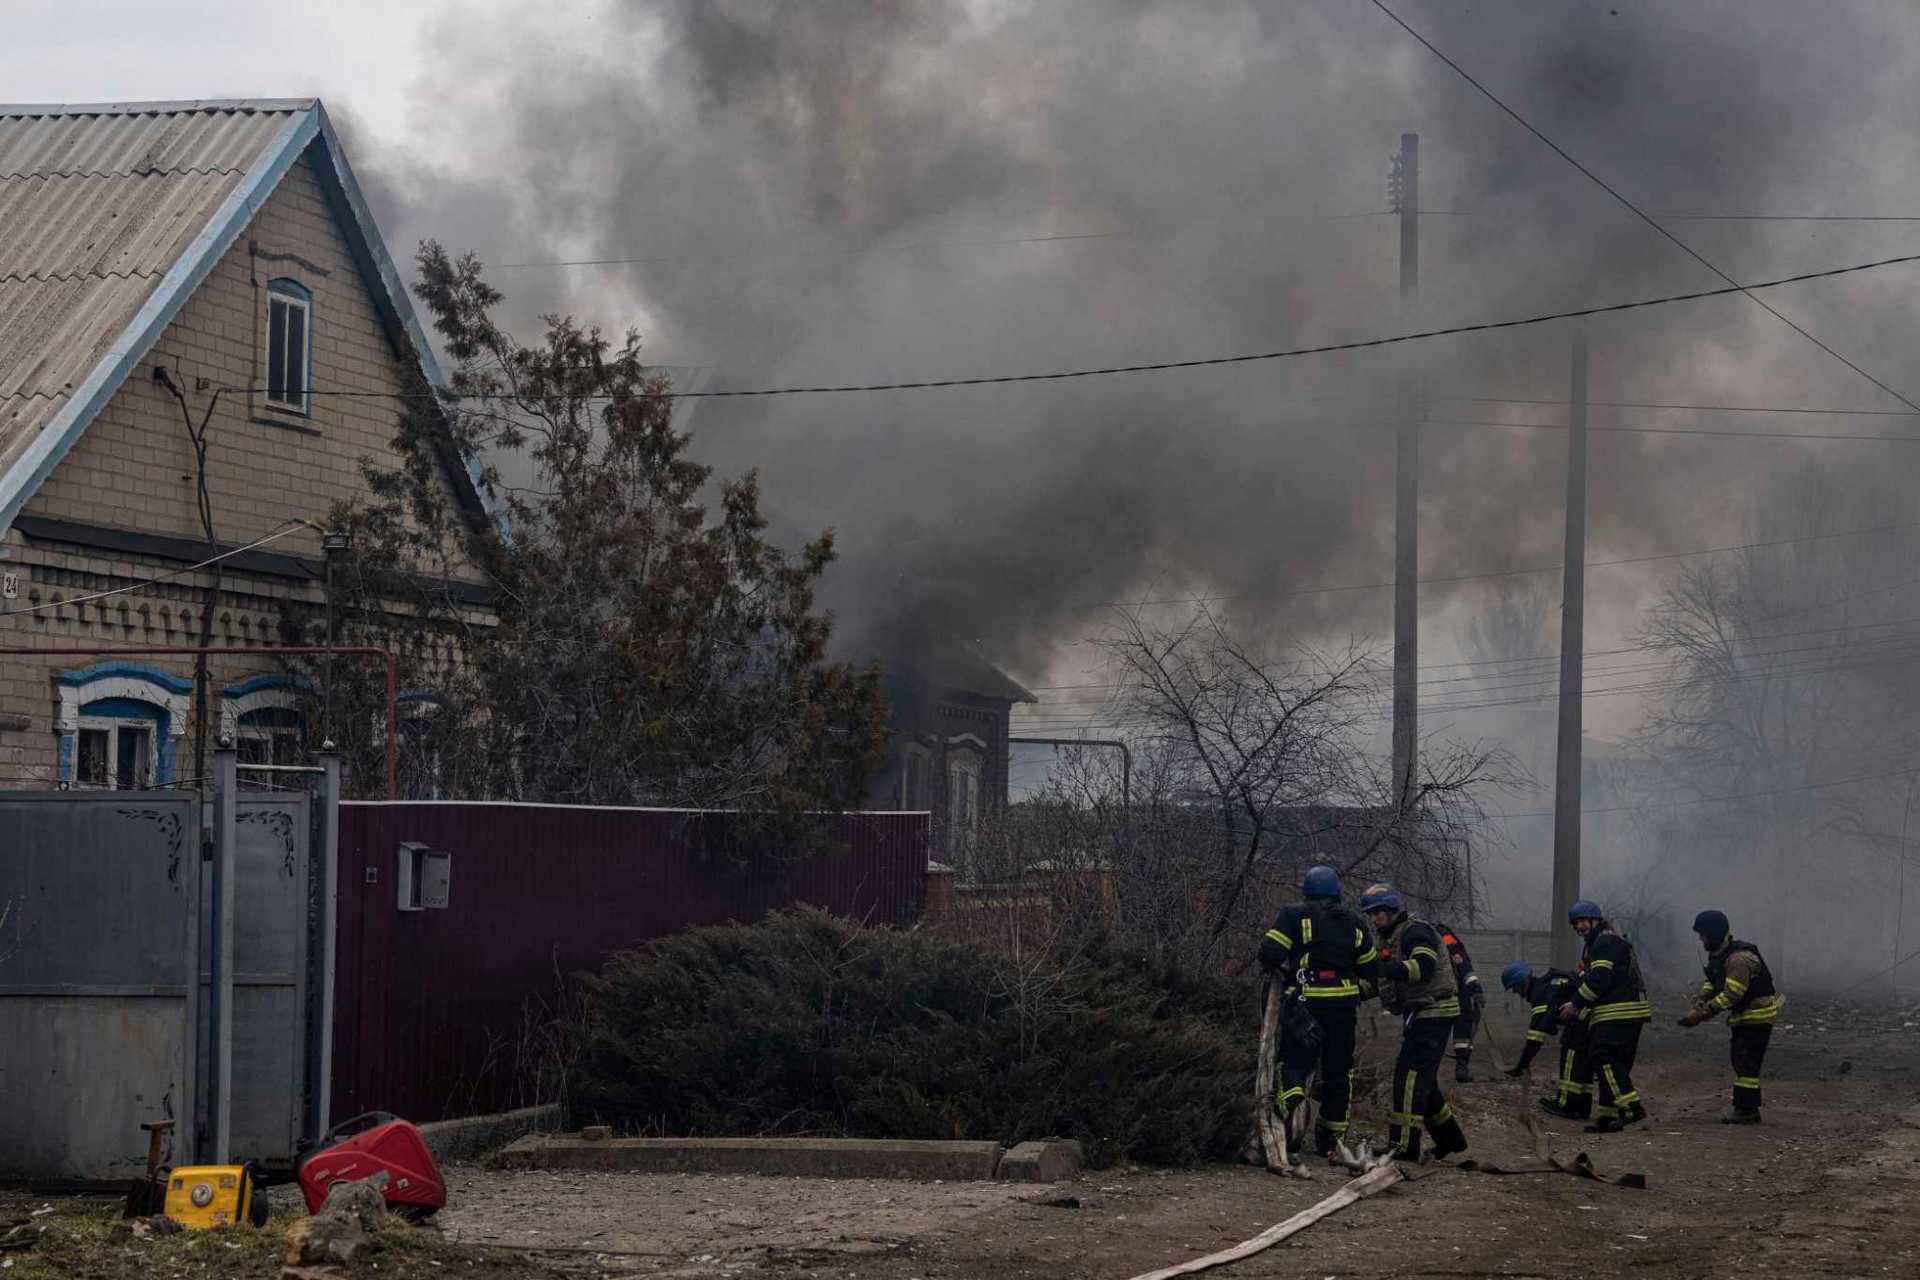 Rescue workers connect fire hoses to start extinguishing the fire after shelling by Russian forces of residential neighborhood in Kostiantynivka